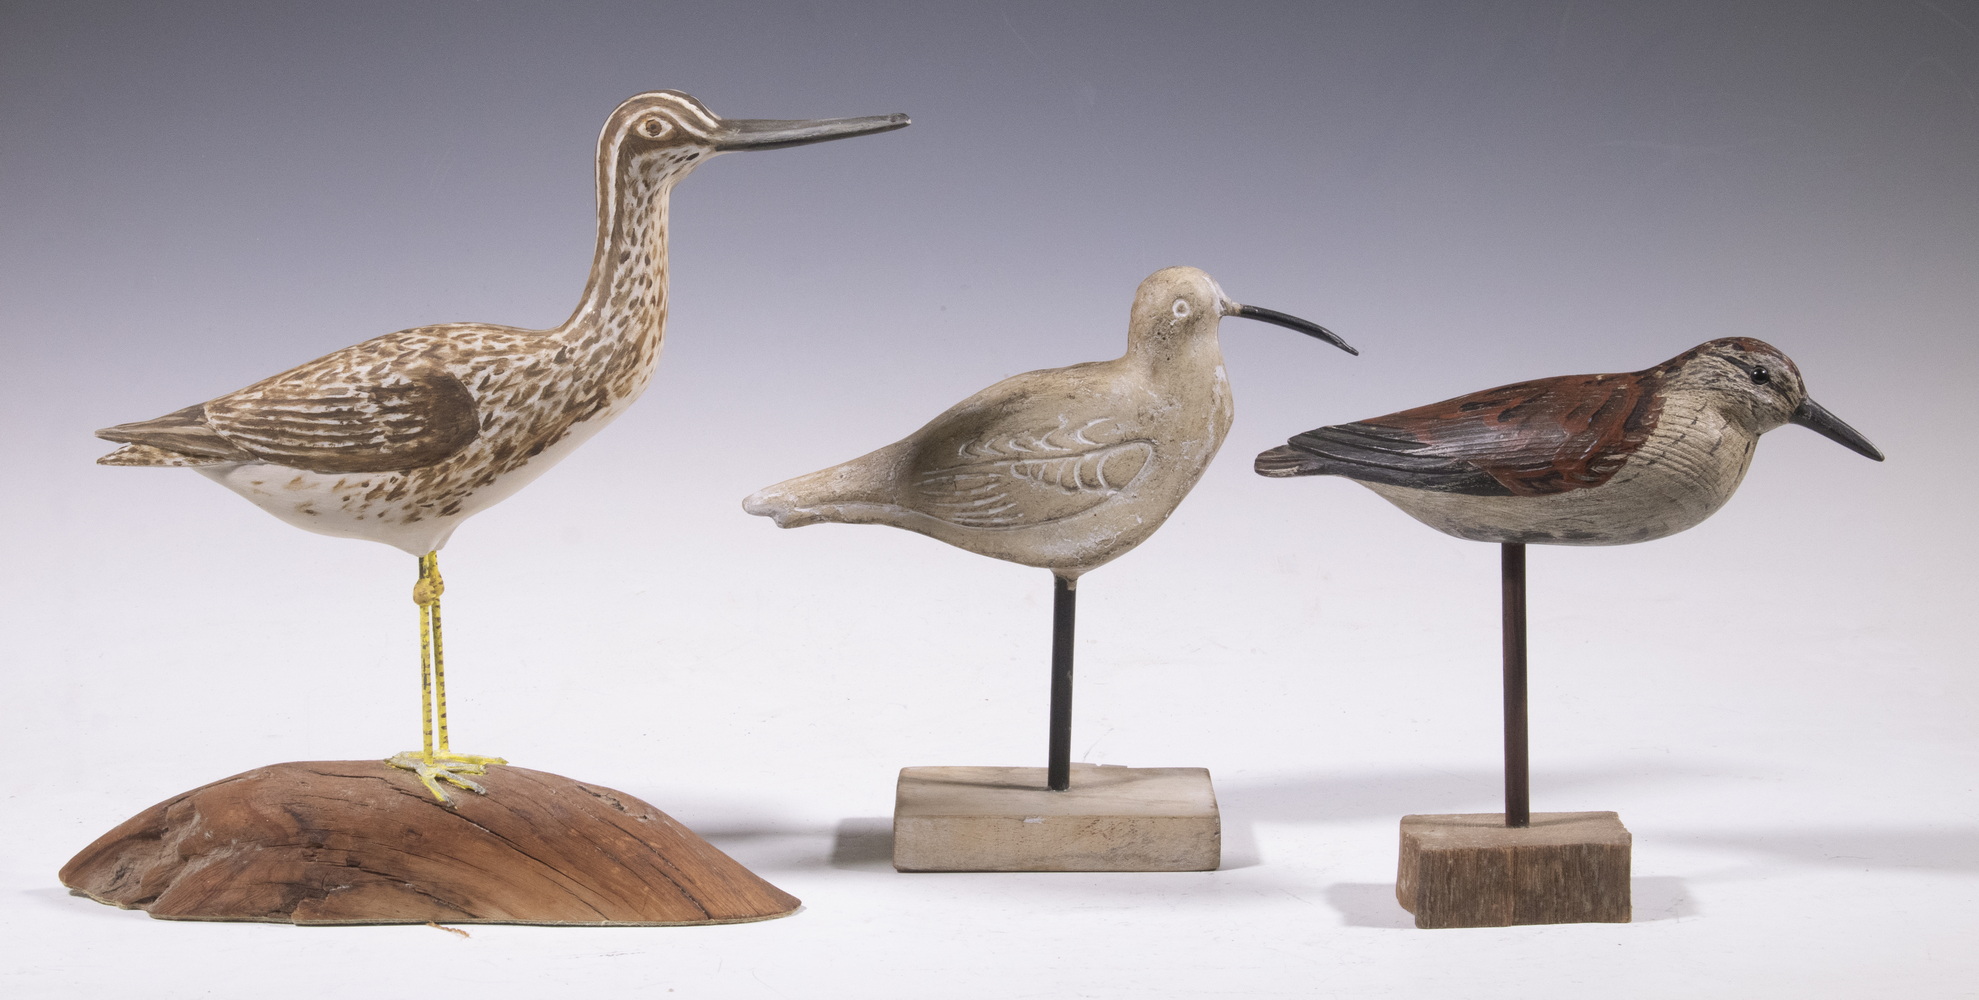 SHOREBIRD CARVINGS ONE BY WILL 302ce0